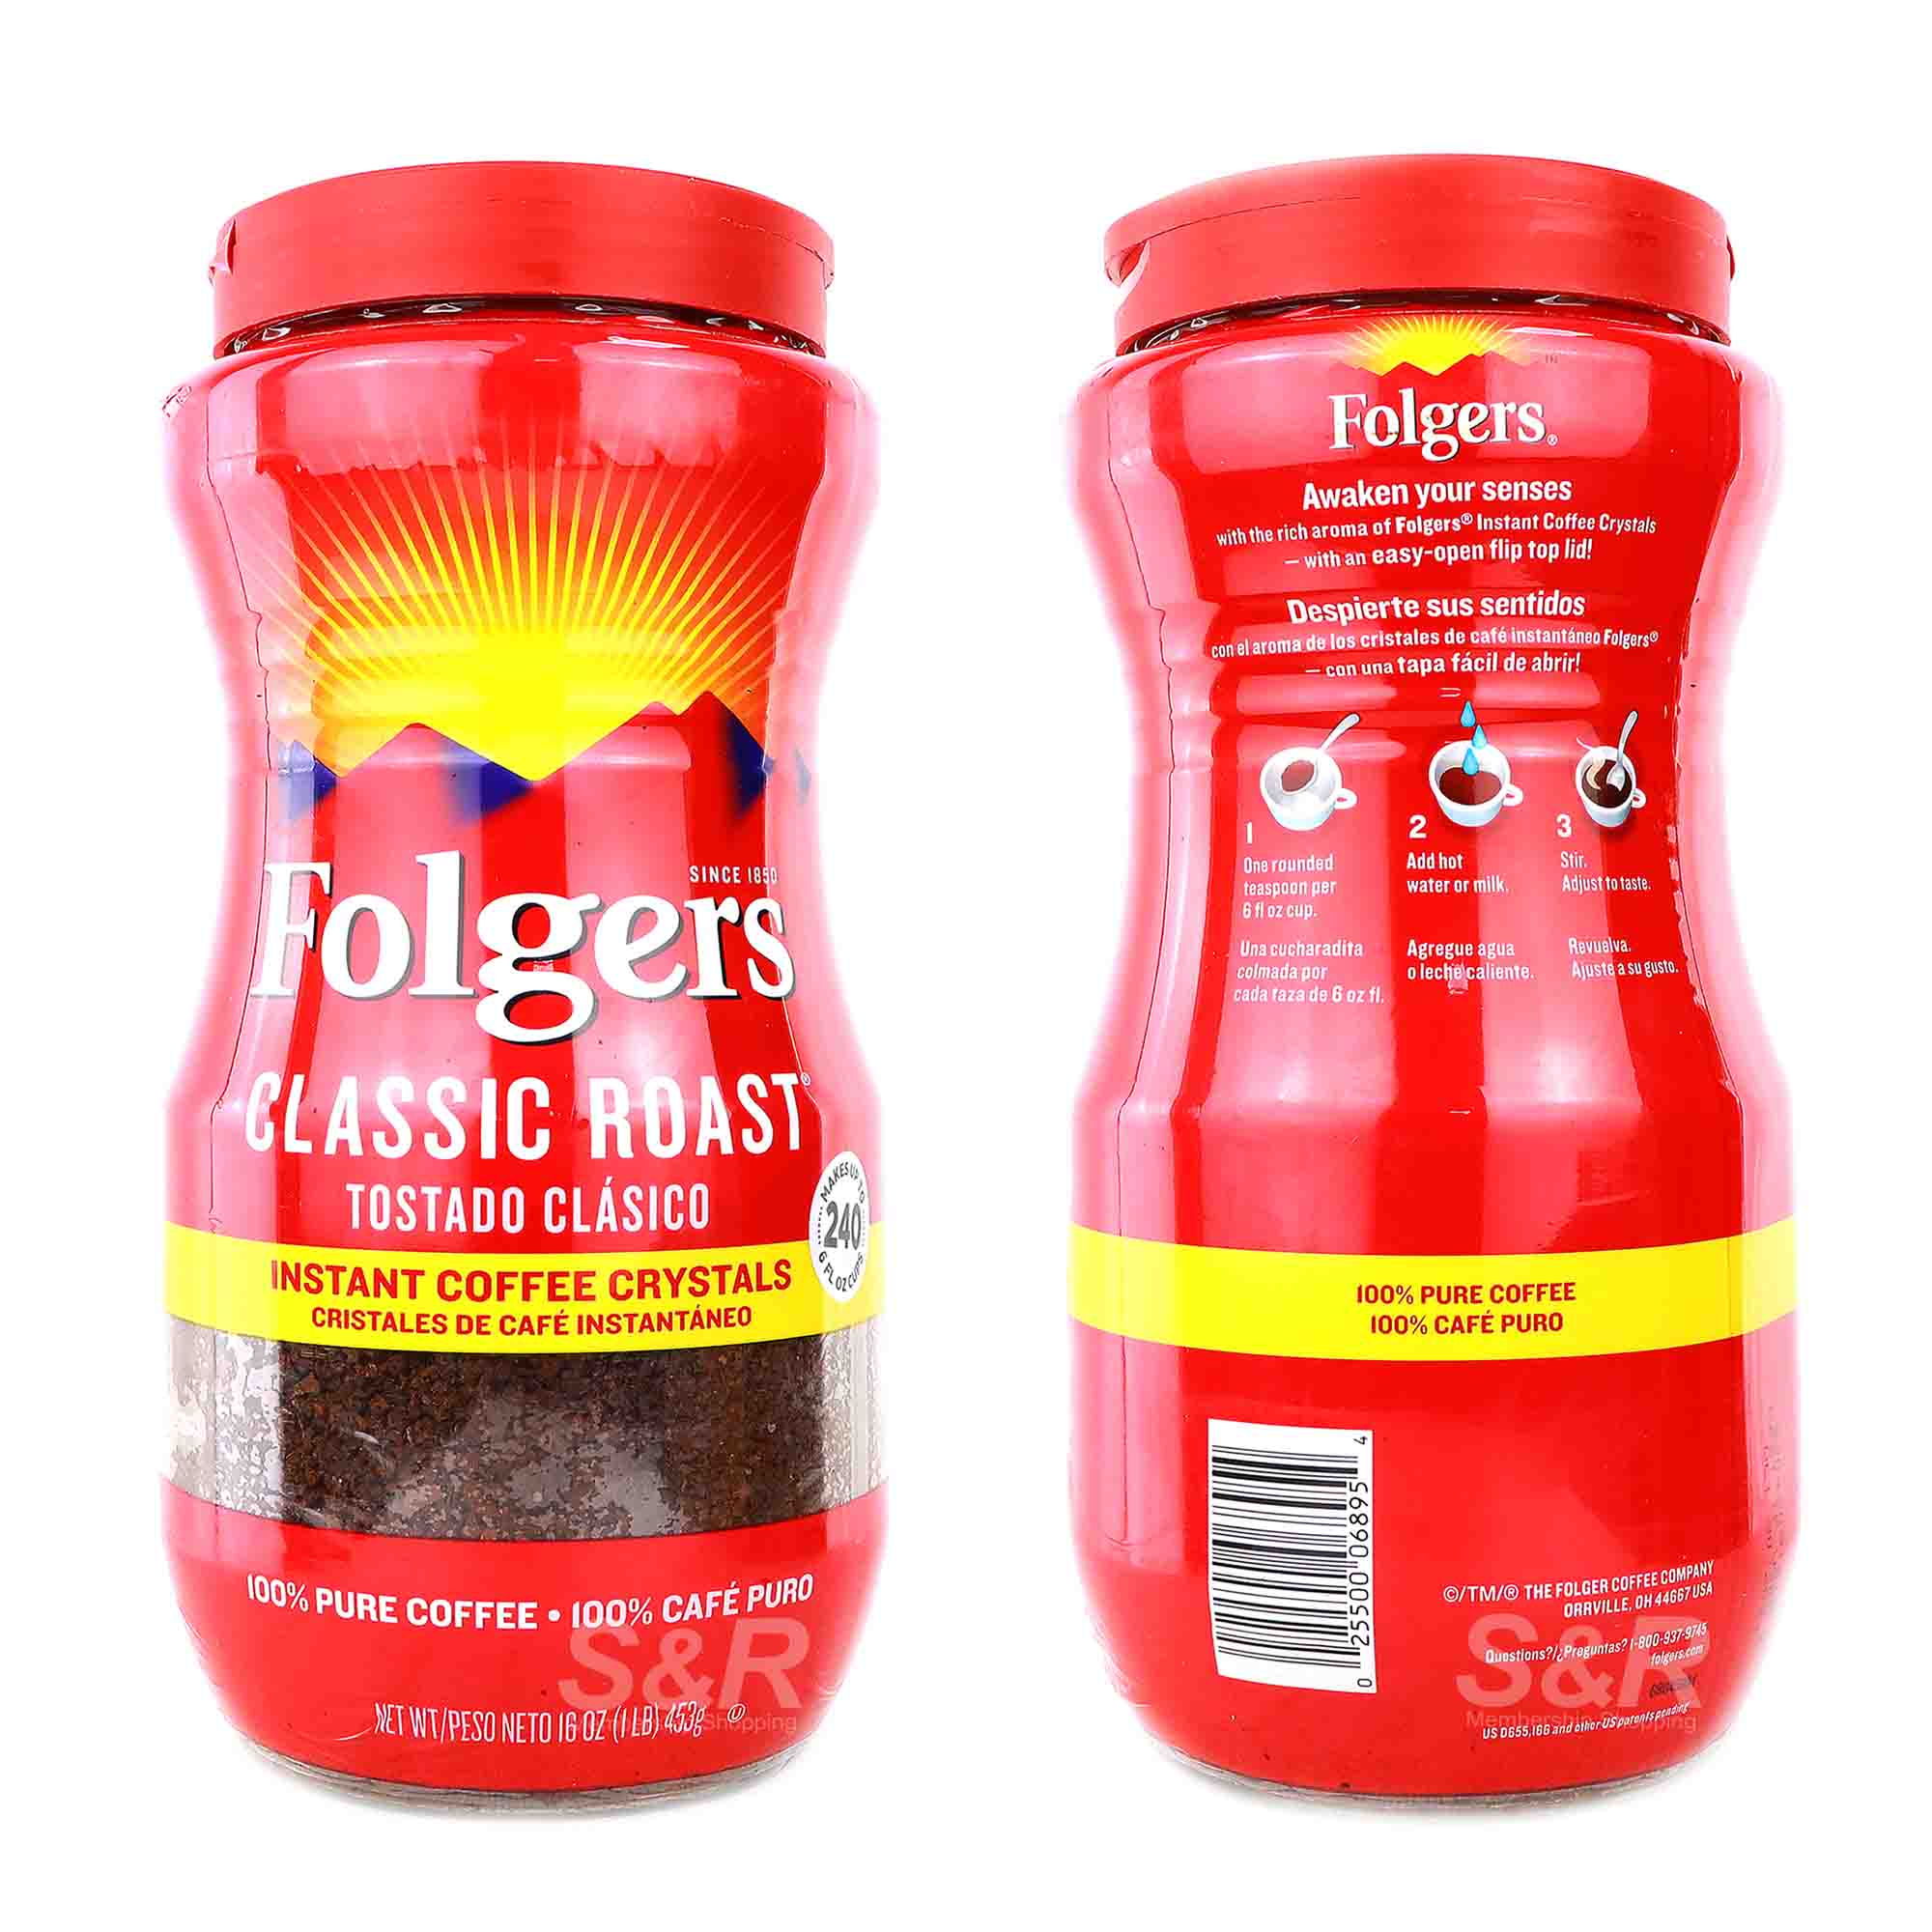 20-must-know-nutrition-facts-about-folgers-coffee